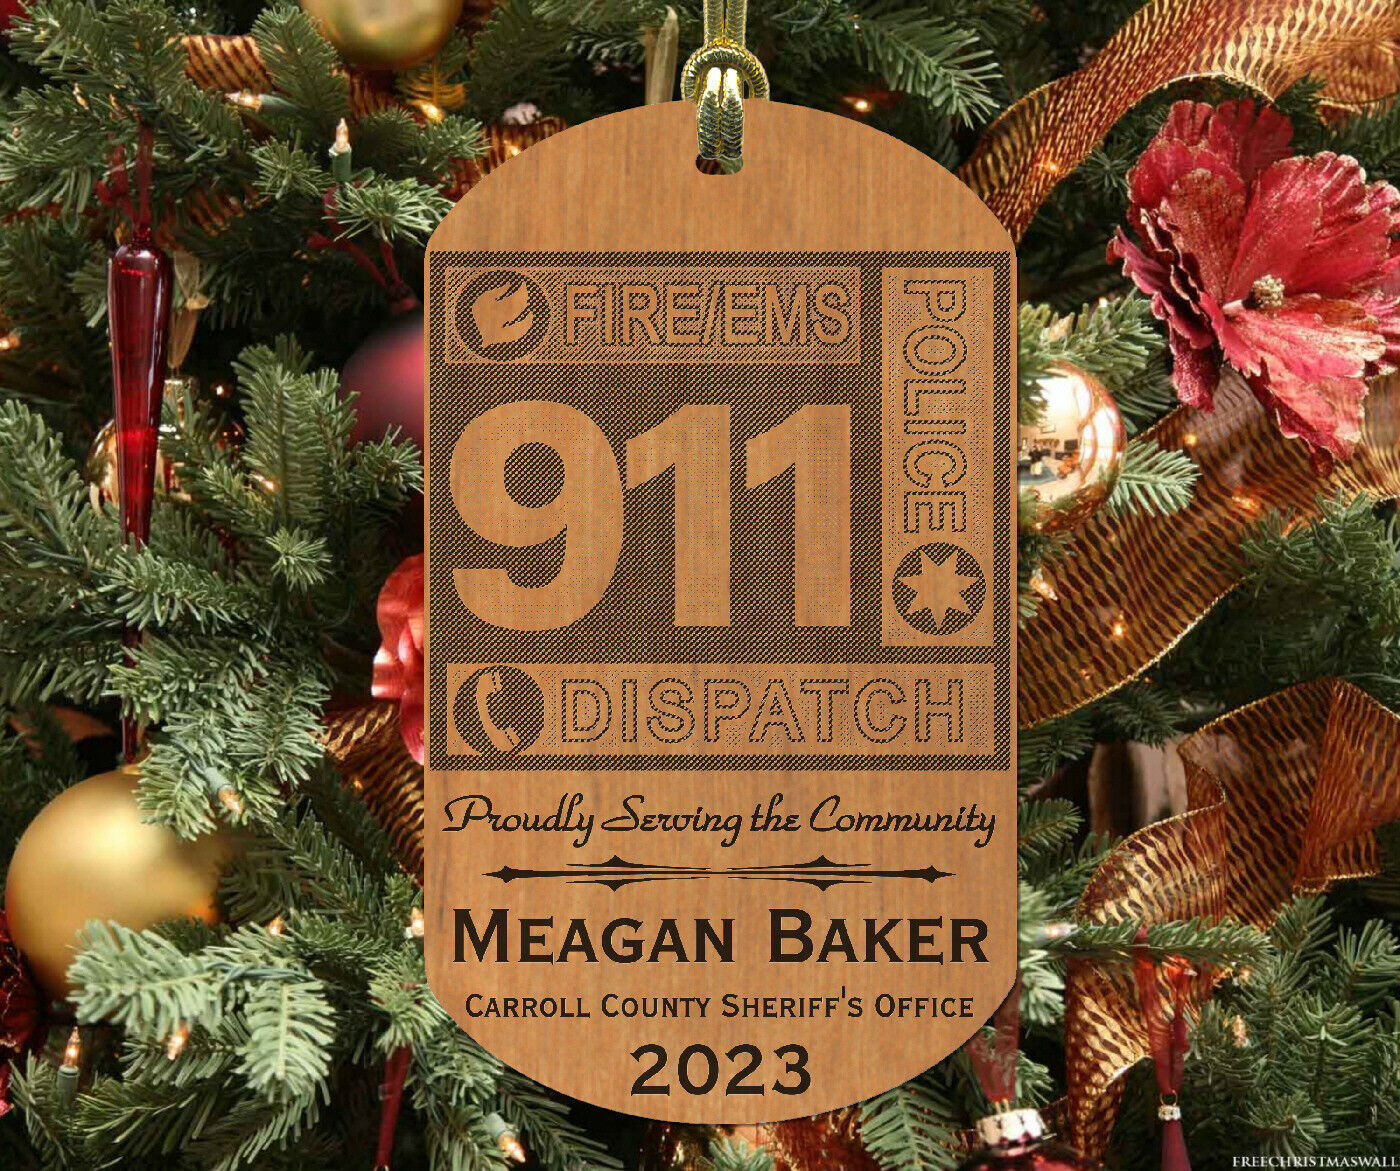 911 DISPATCHER Christmas Ornament, Engraved Wood Keepsake Gift, Personalized